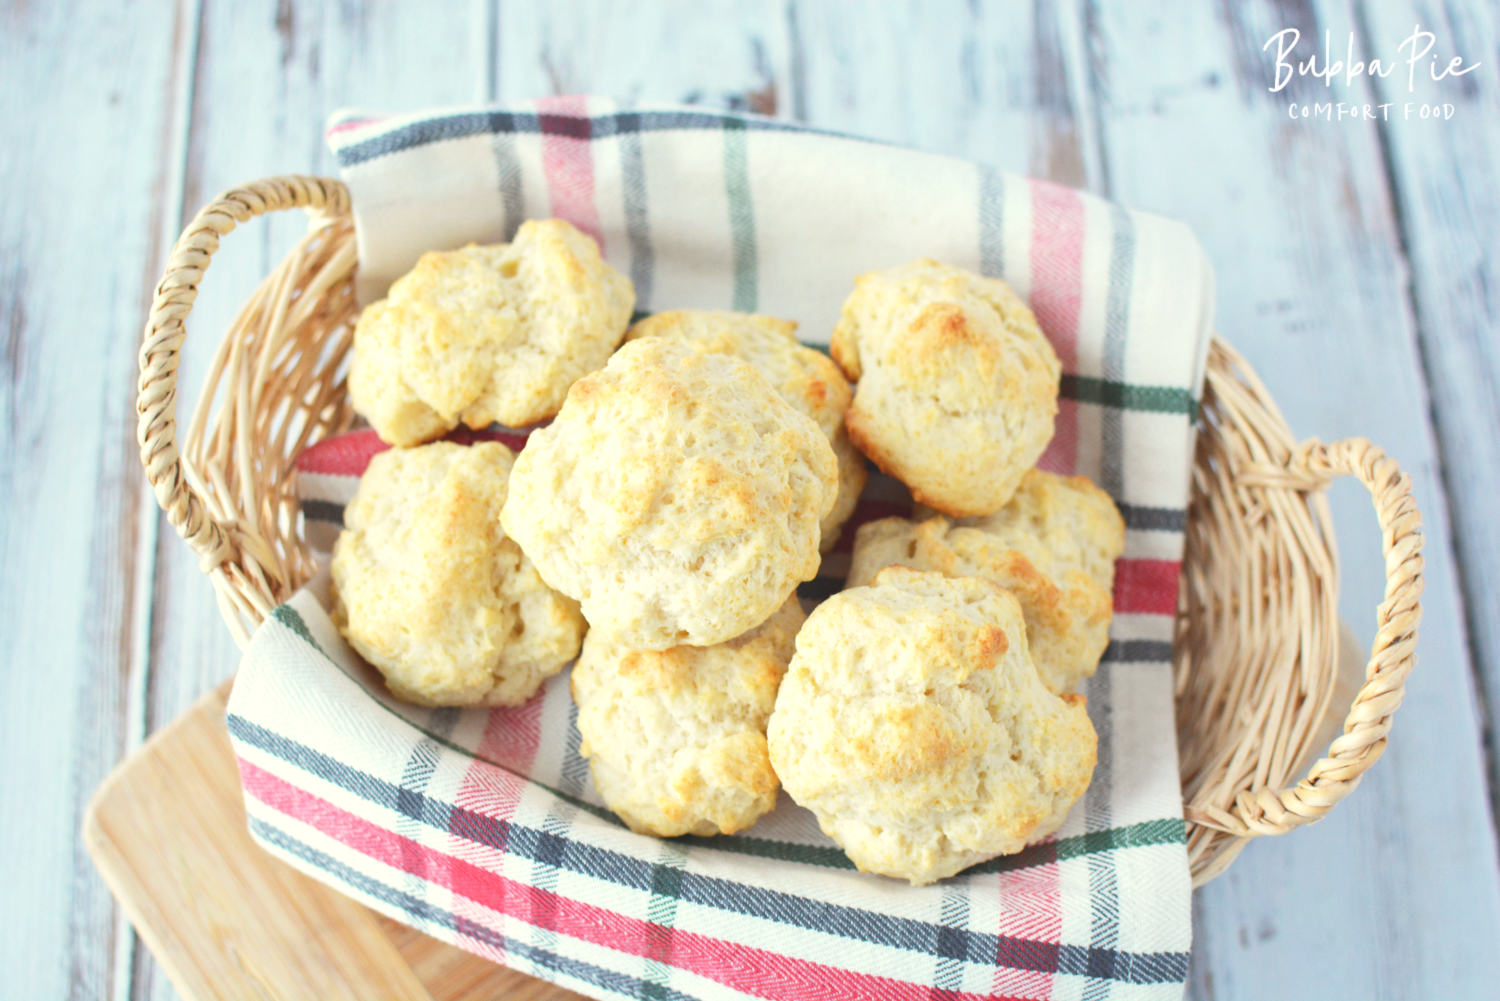 This quick and easy drop biscuit recipe is the perfect partner for any dish.